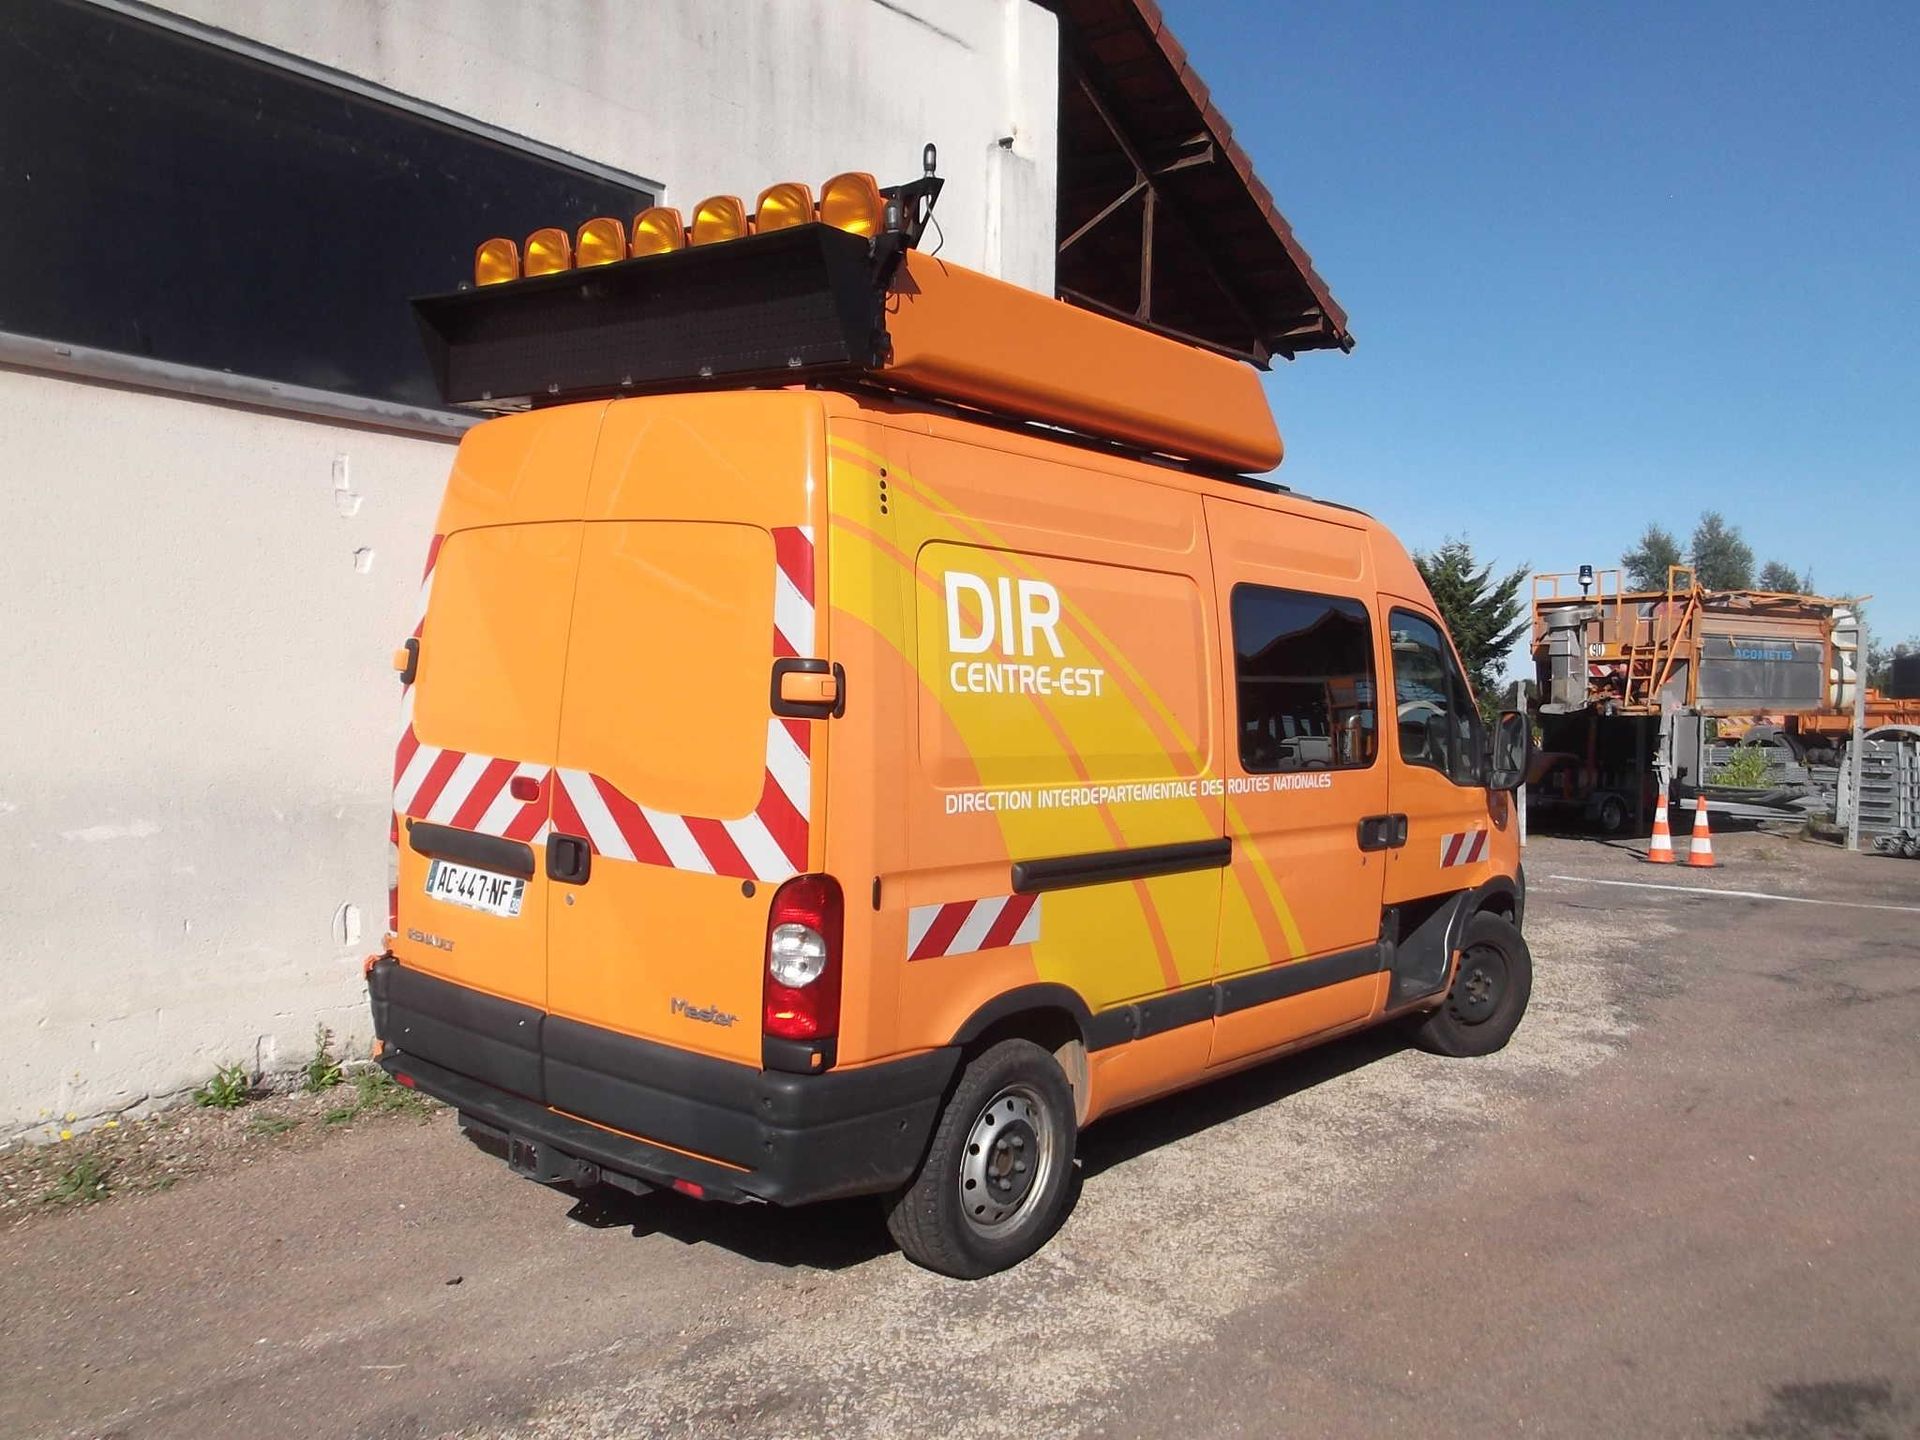 Null [RP] Reserved for Professionals
RENAULT Master DCI 120 L2H2 Gazole, imm. AC&hellip;